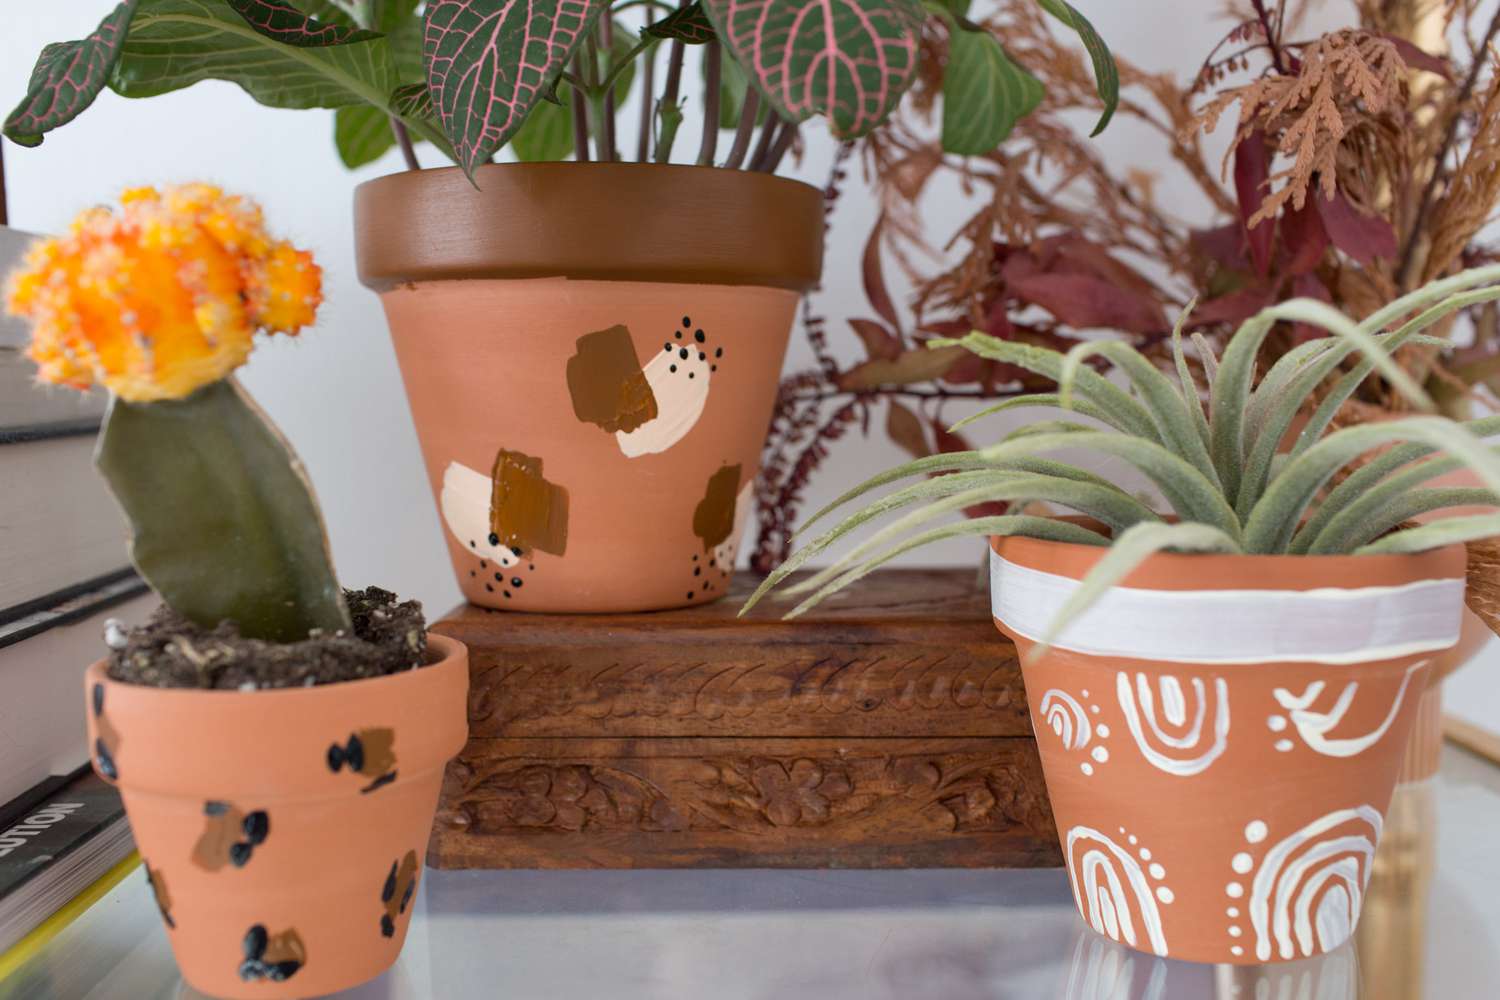 A collection of Beautiful handpainted ceramic plant pots.